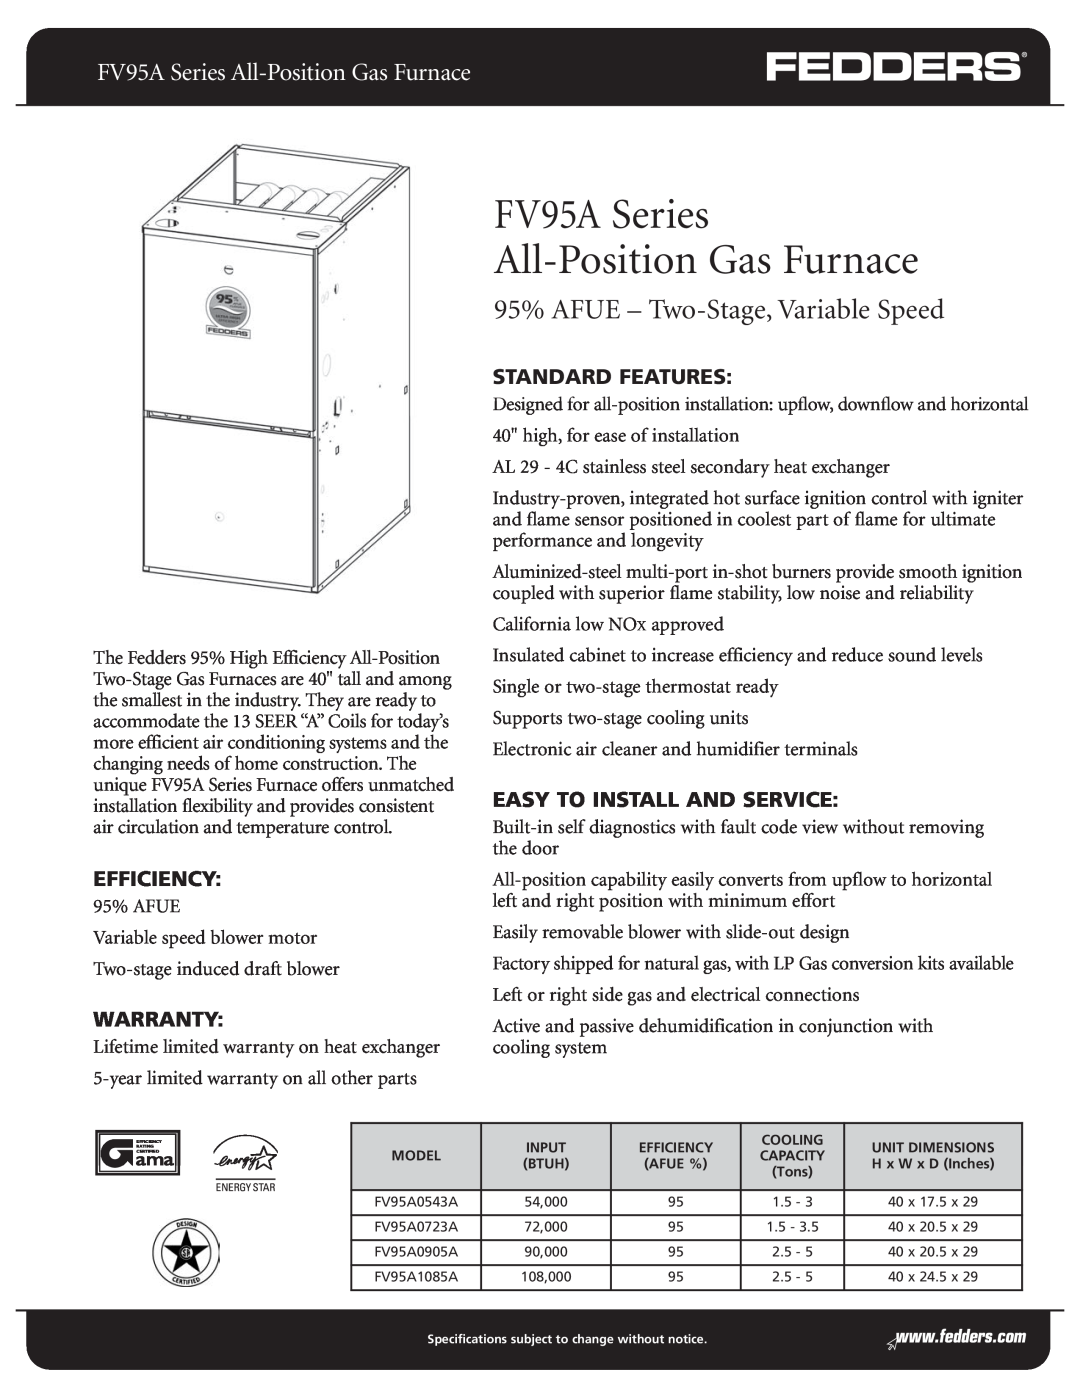 Fedders warranty FV95A Series All-PositionGas Furnace, 95% AFUE - Two-Stage,Variable Speed, Efficiency, Warranty 